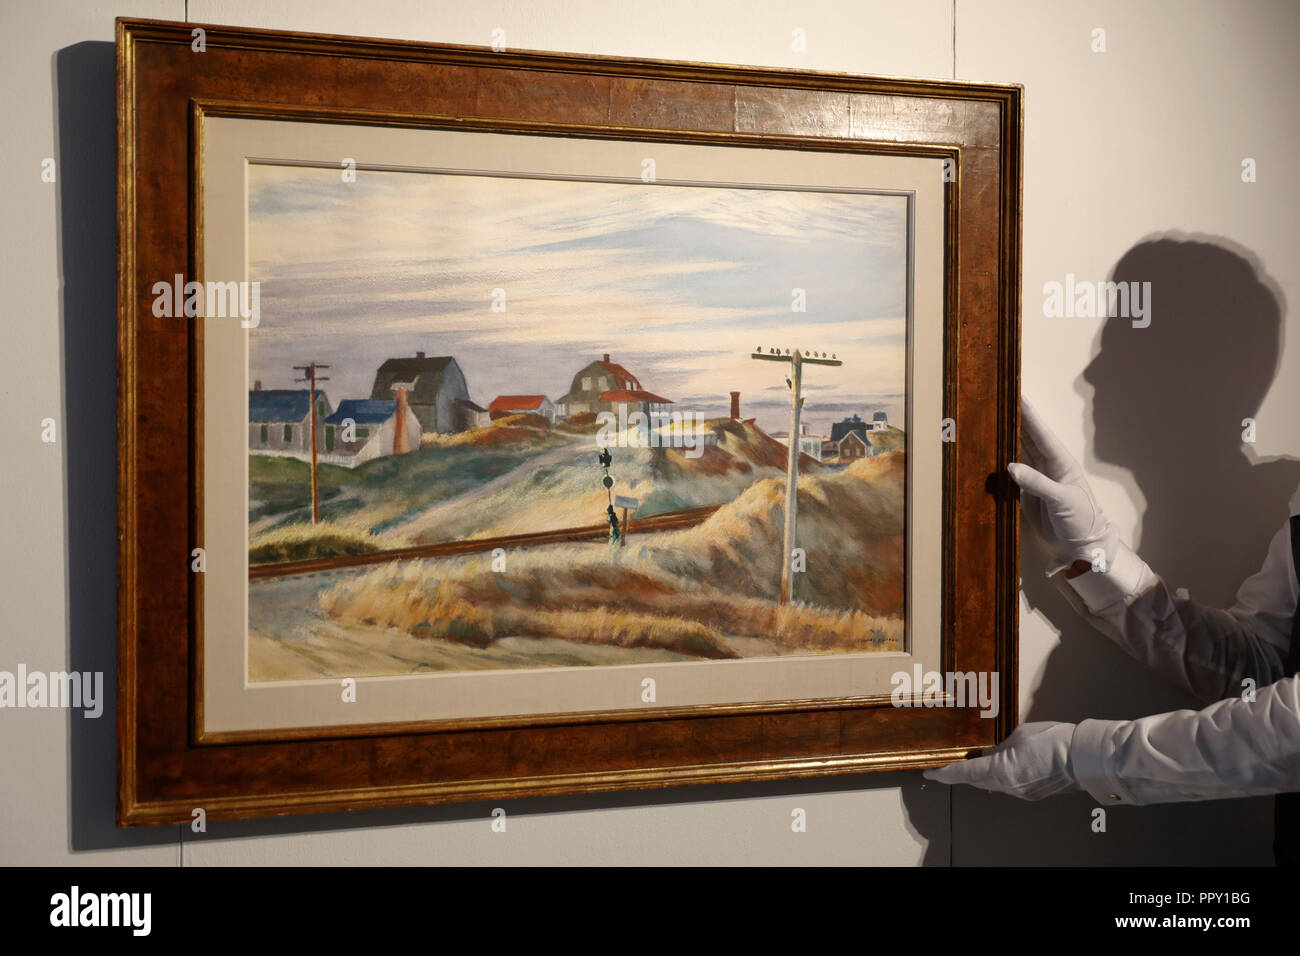 London, UK. 28th Sep 2018. Christie's employee posew with artist Edward Hopper's work 'Cottages at North Truro, MA' at Christie's auction house in London, Friday September 28, 2018.  It is expected to achieve up to $3million when it comes to sale in New York in November. Photograph : © Luke MacGregor Credit: Luke MacGregor/Alamy Live News Stock Photo